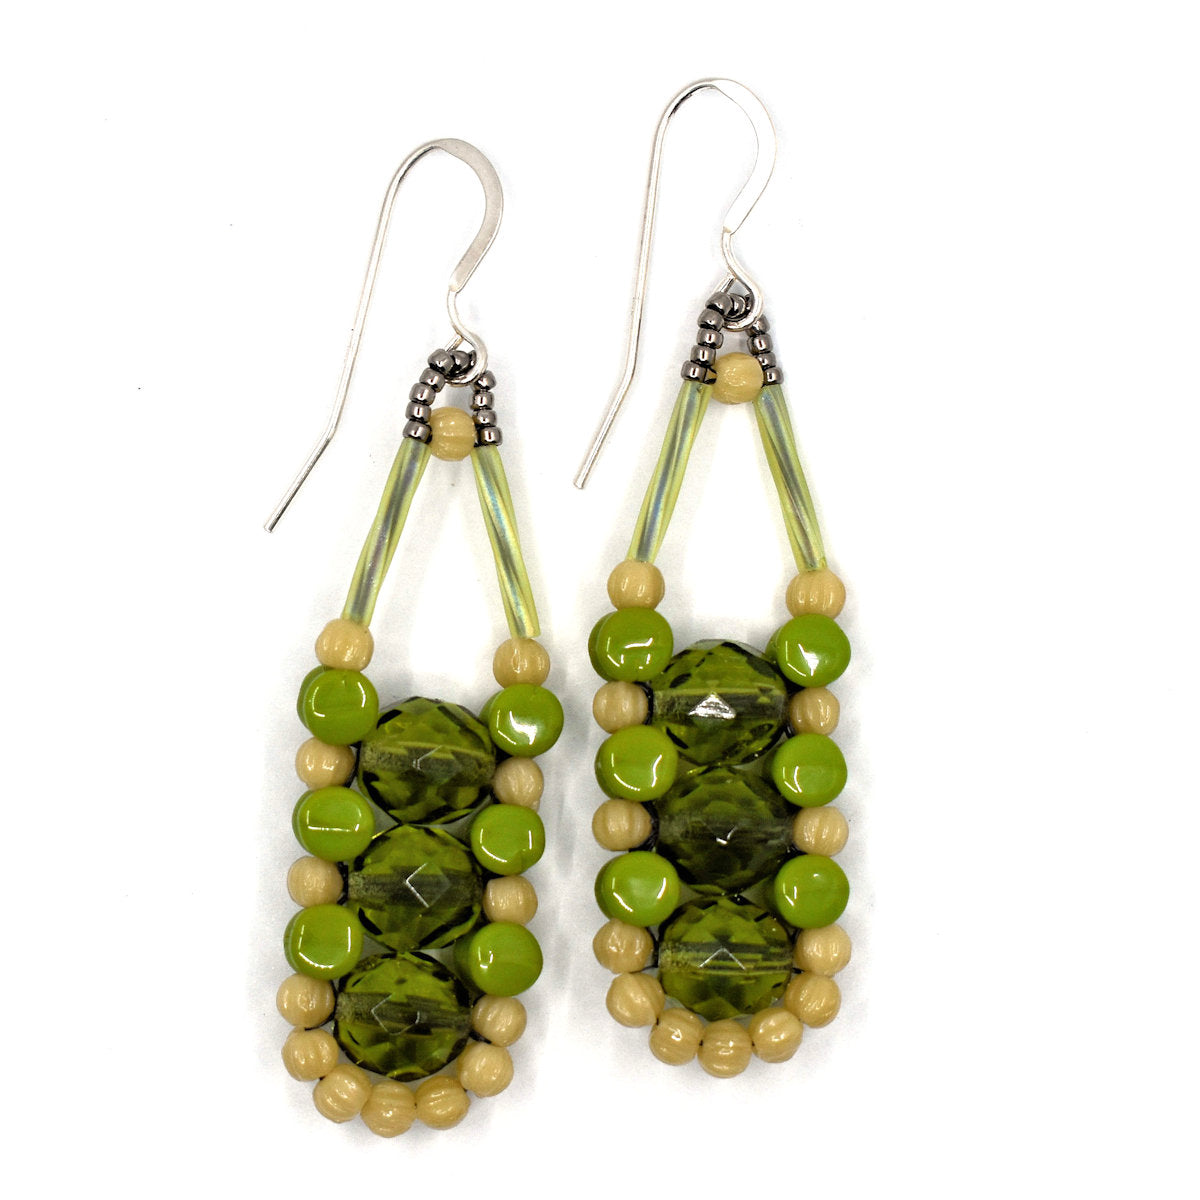 Long green earrings with dark cream and avocado, with silver accents and ear wires on a white background. There are three olive green beads stacked vertically in the center of these beads, like peas, surrounded by an outline of dark cream and avocado green beads.